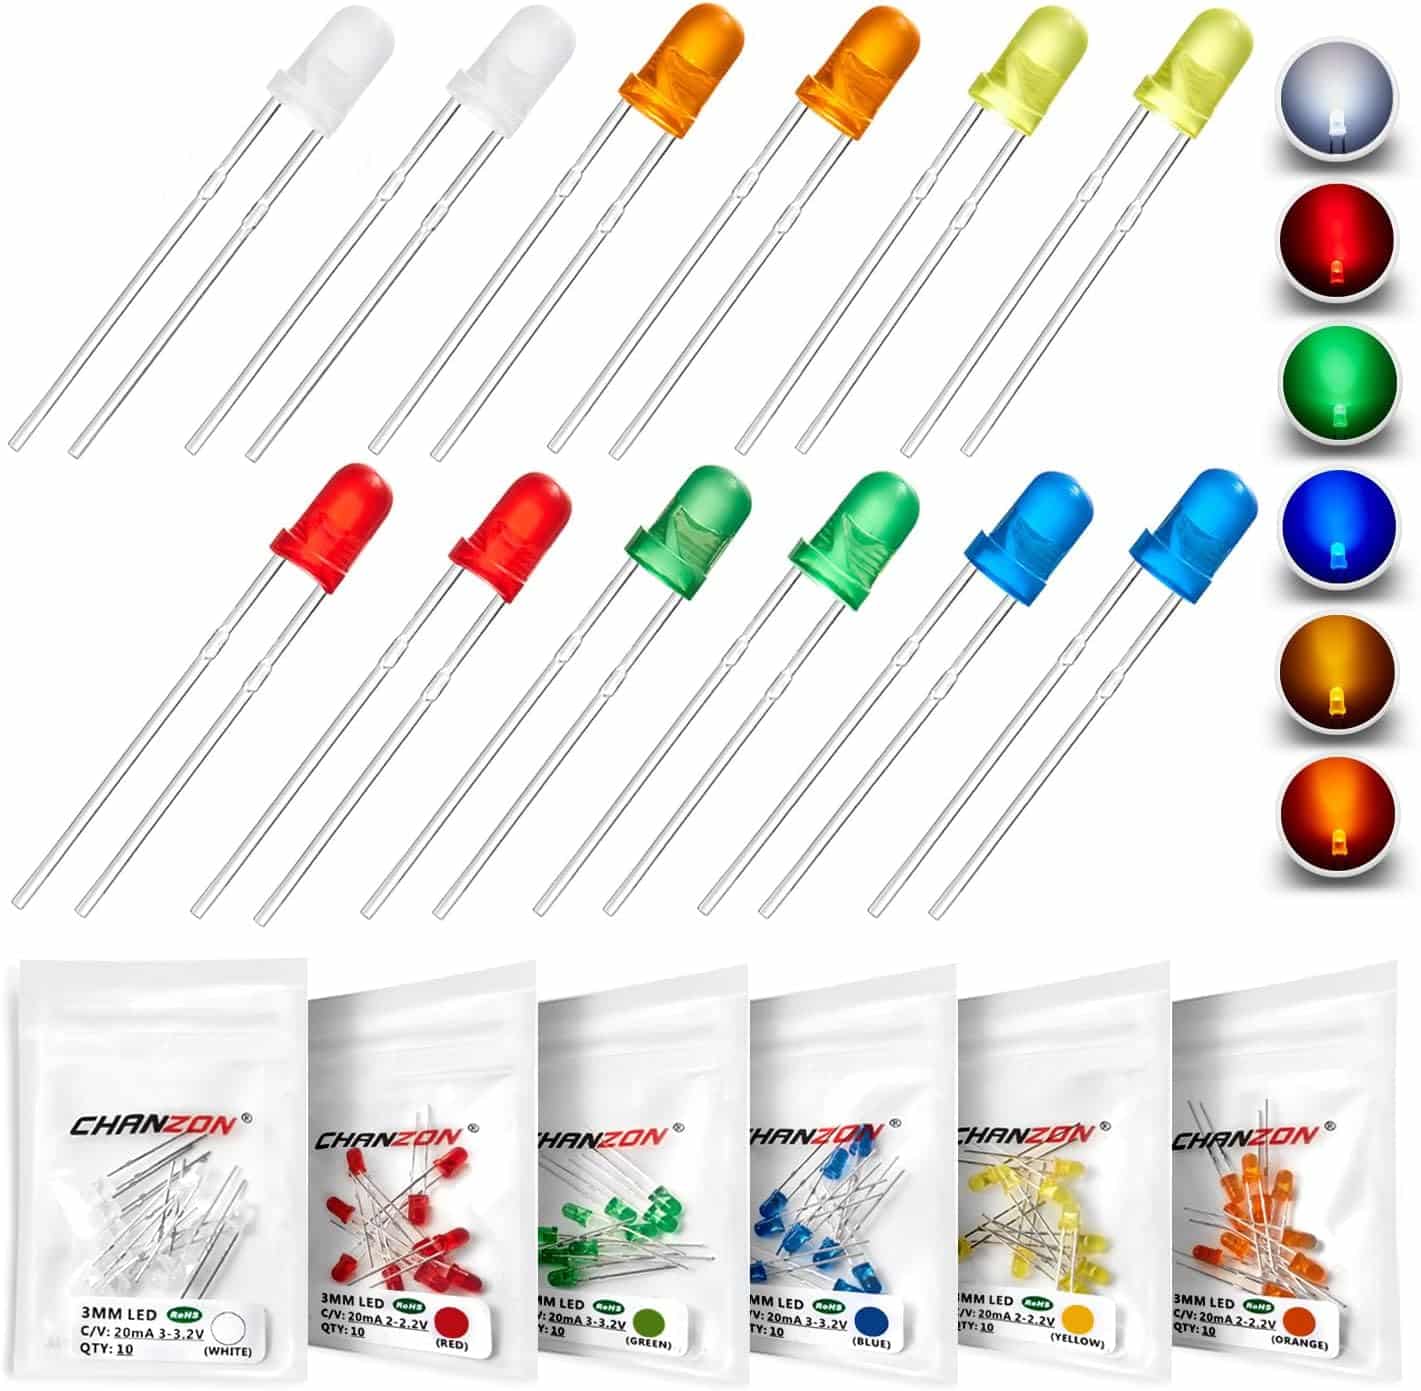 Chanzon 3mm LED Diode Lights Assortment Kit Review